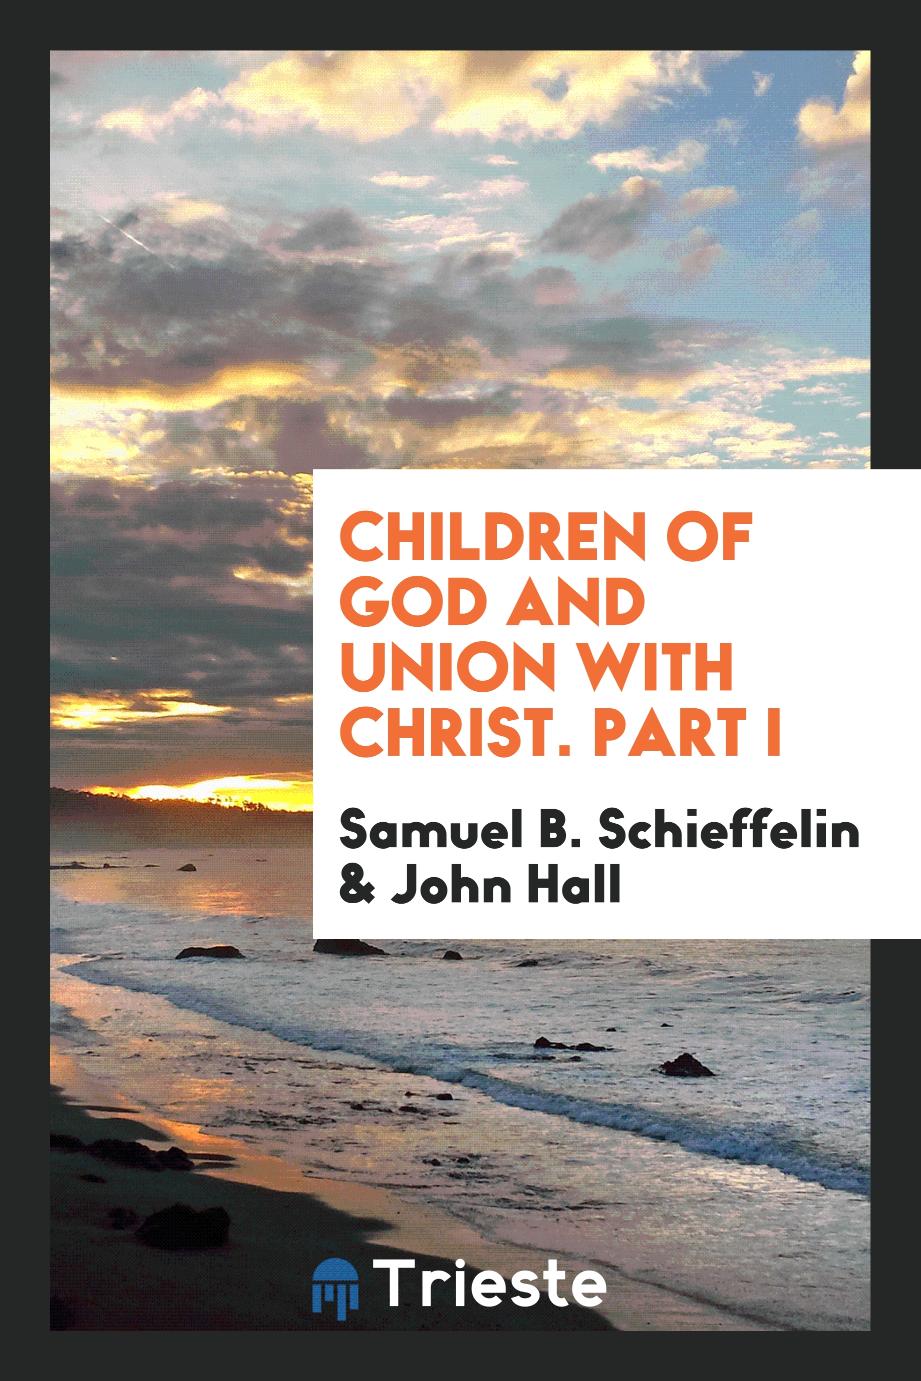 Children of God and Union with Christ. Part I